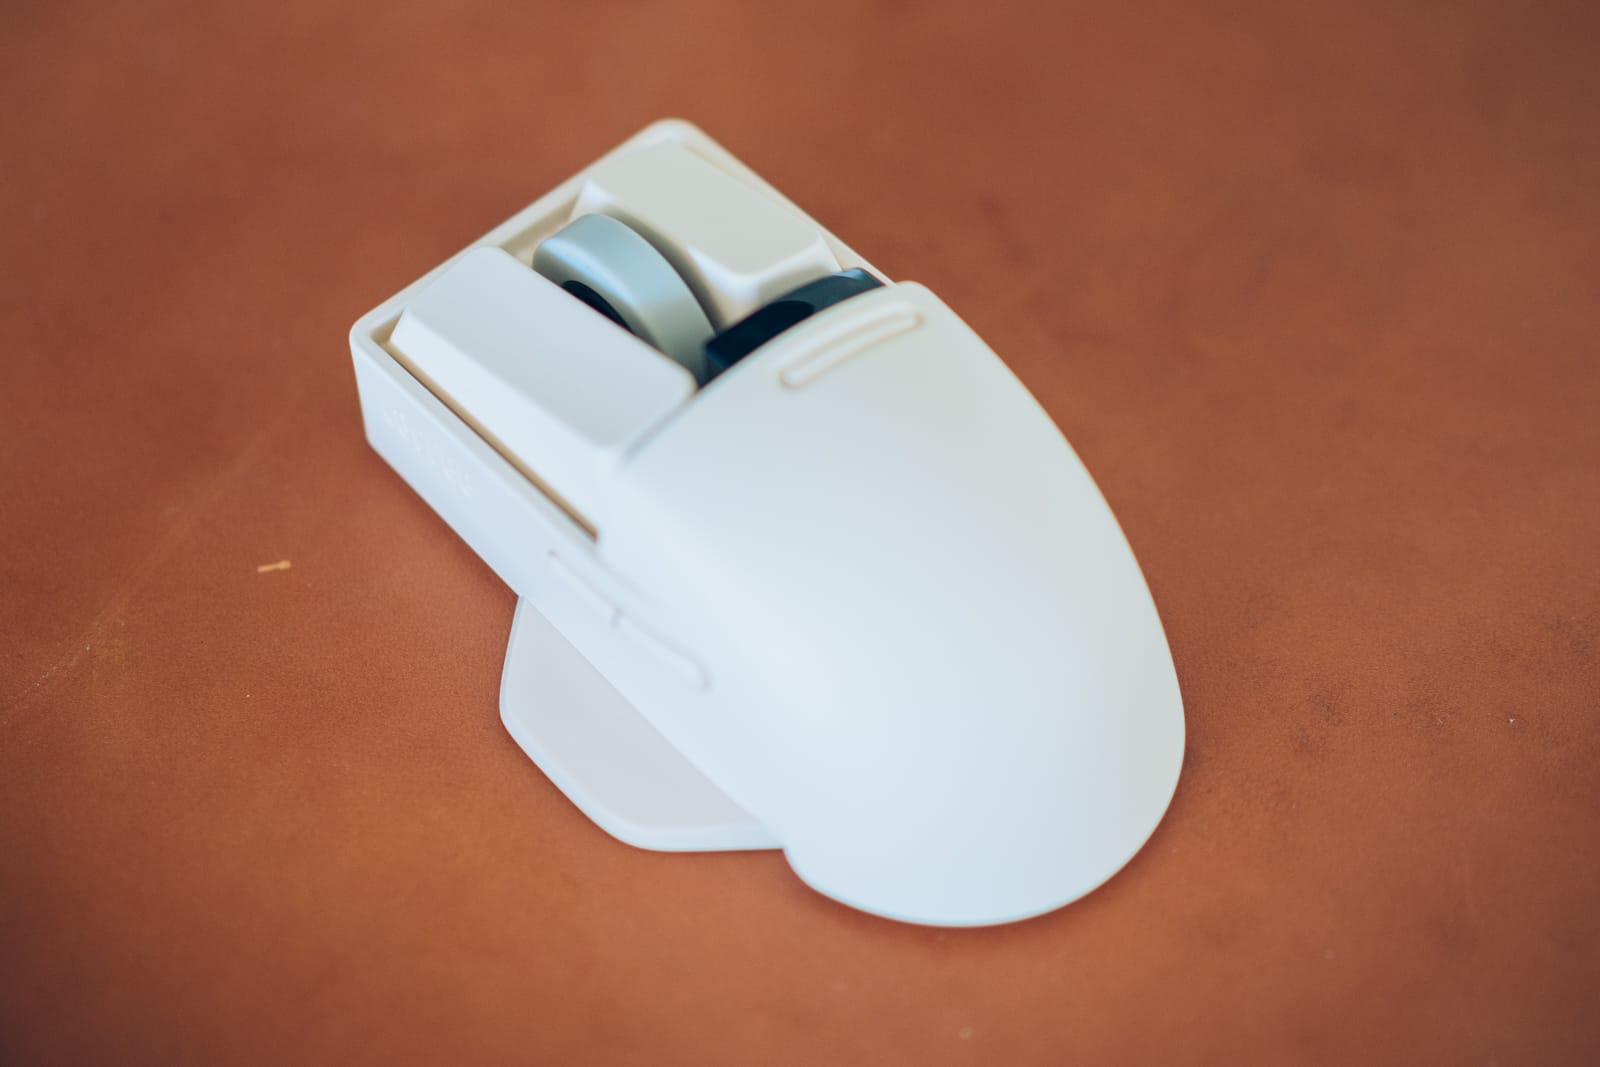 Lofree TOUCH PBT Wireless Mouse